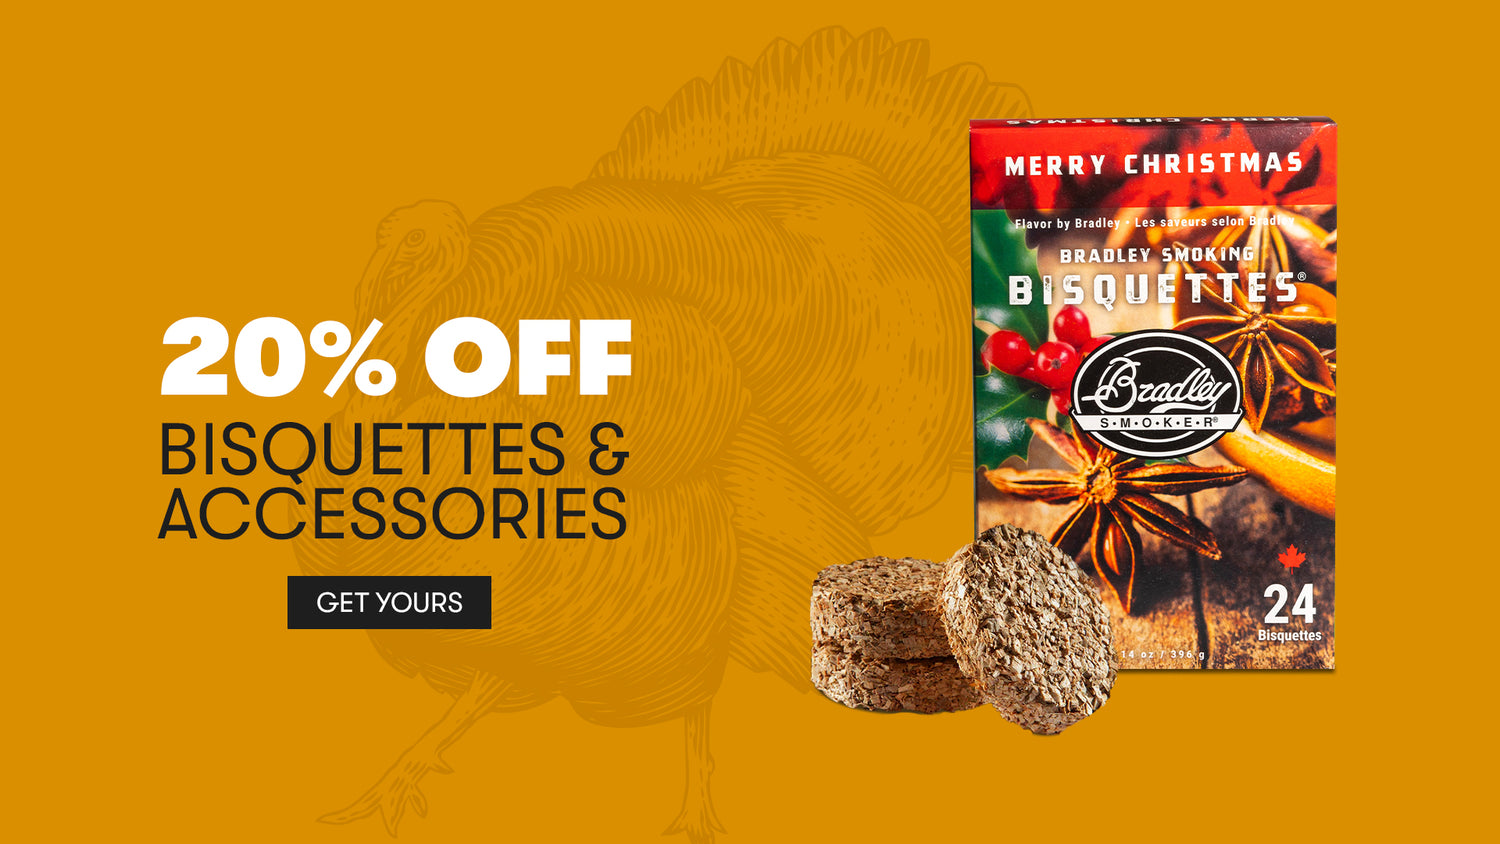 Black Friday Sale - SAT and SUN Only - 20% off bisquettes & accessories
*Sale applies to orders on bradleysmoker.com